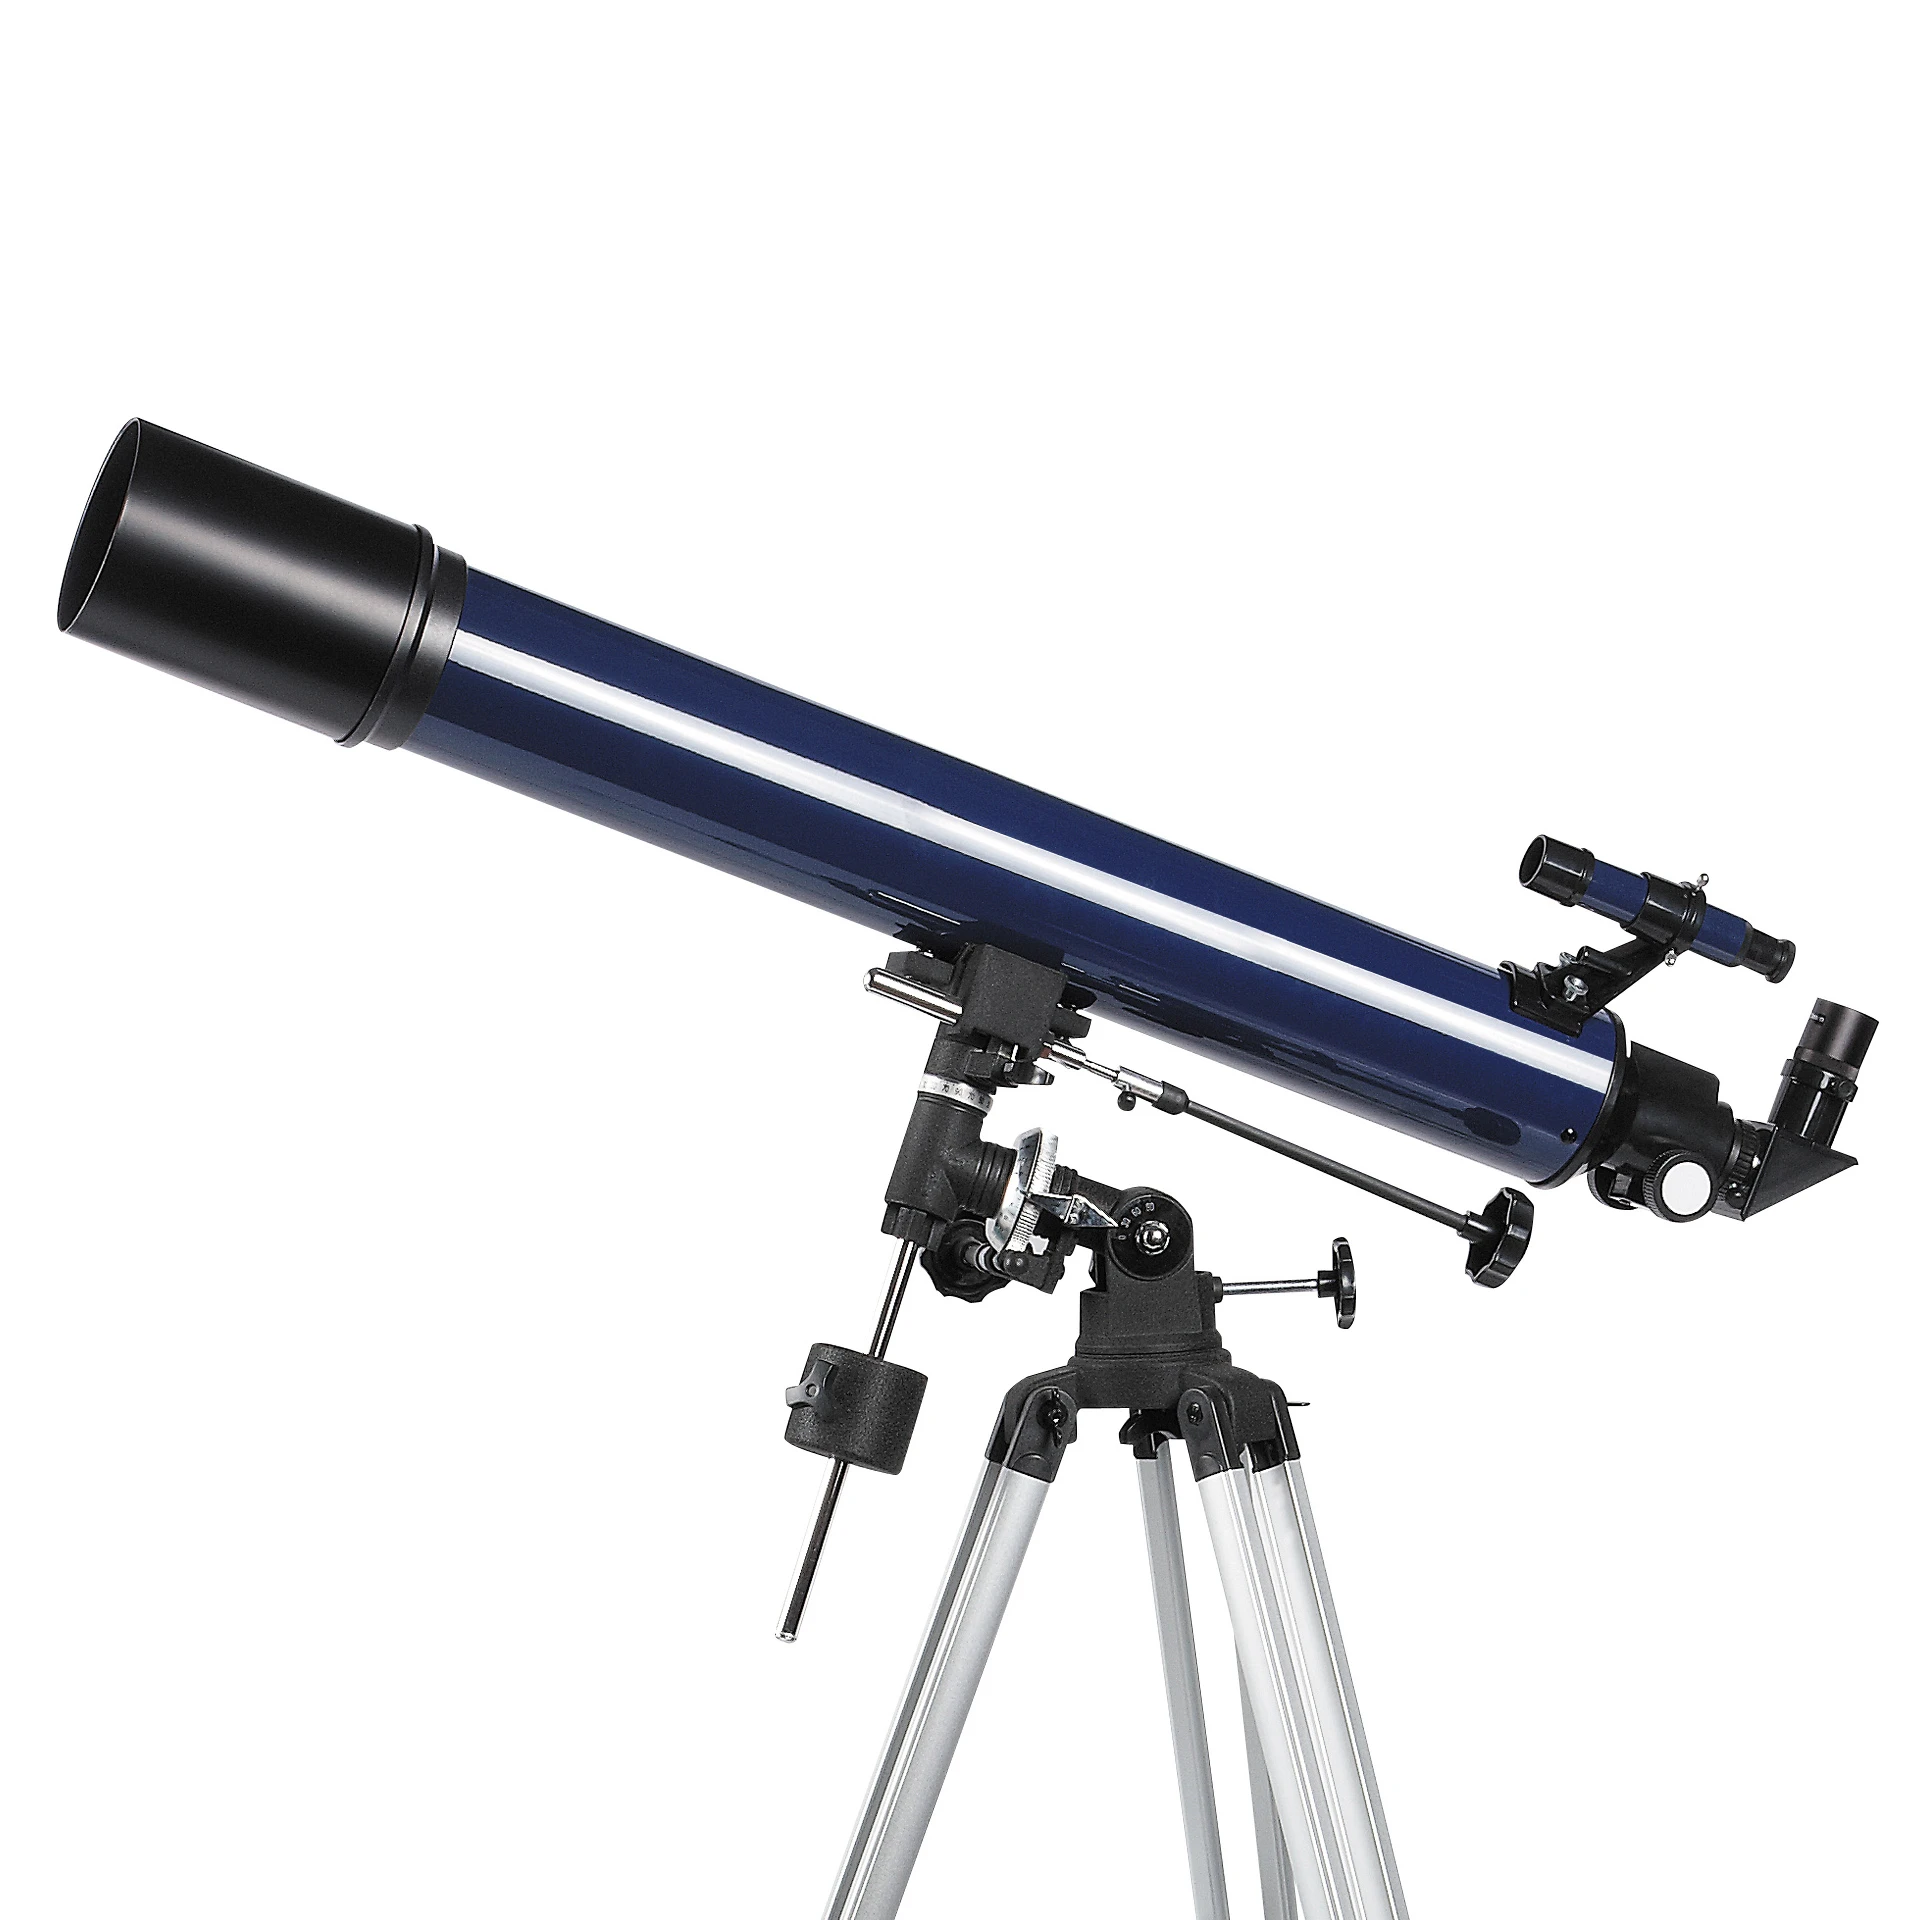 aperture 80mm focus length 900mm fully coated optical glass adjustable tripod Refractor astronomical telescope for advance user